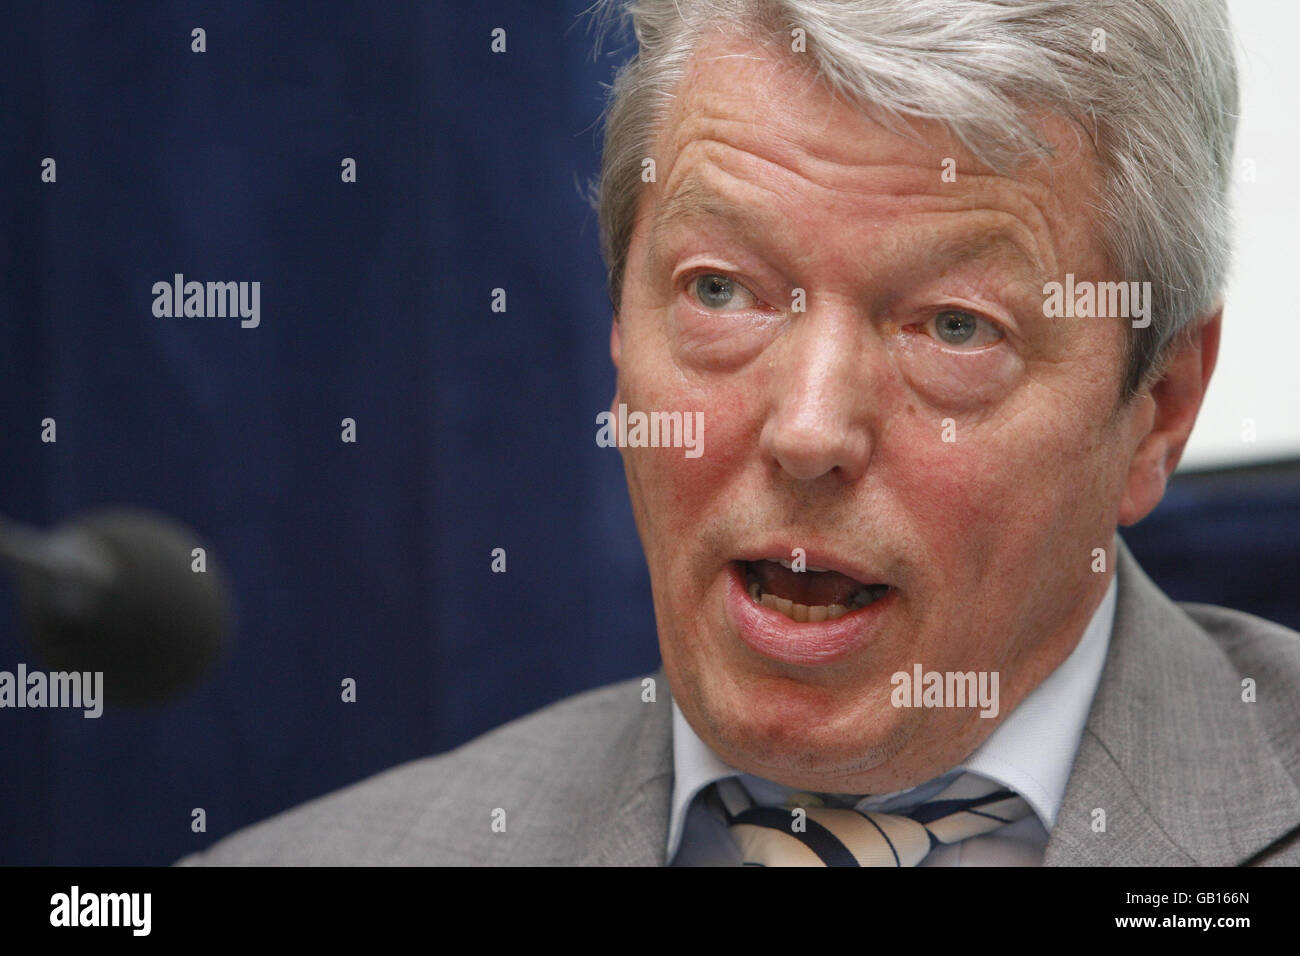 Health Secretary Alan Johnson answers questions after having delivered a lecture to the Fabian Society on public health at Westminster Central Hall in central London. Stock Photo